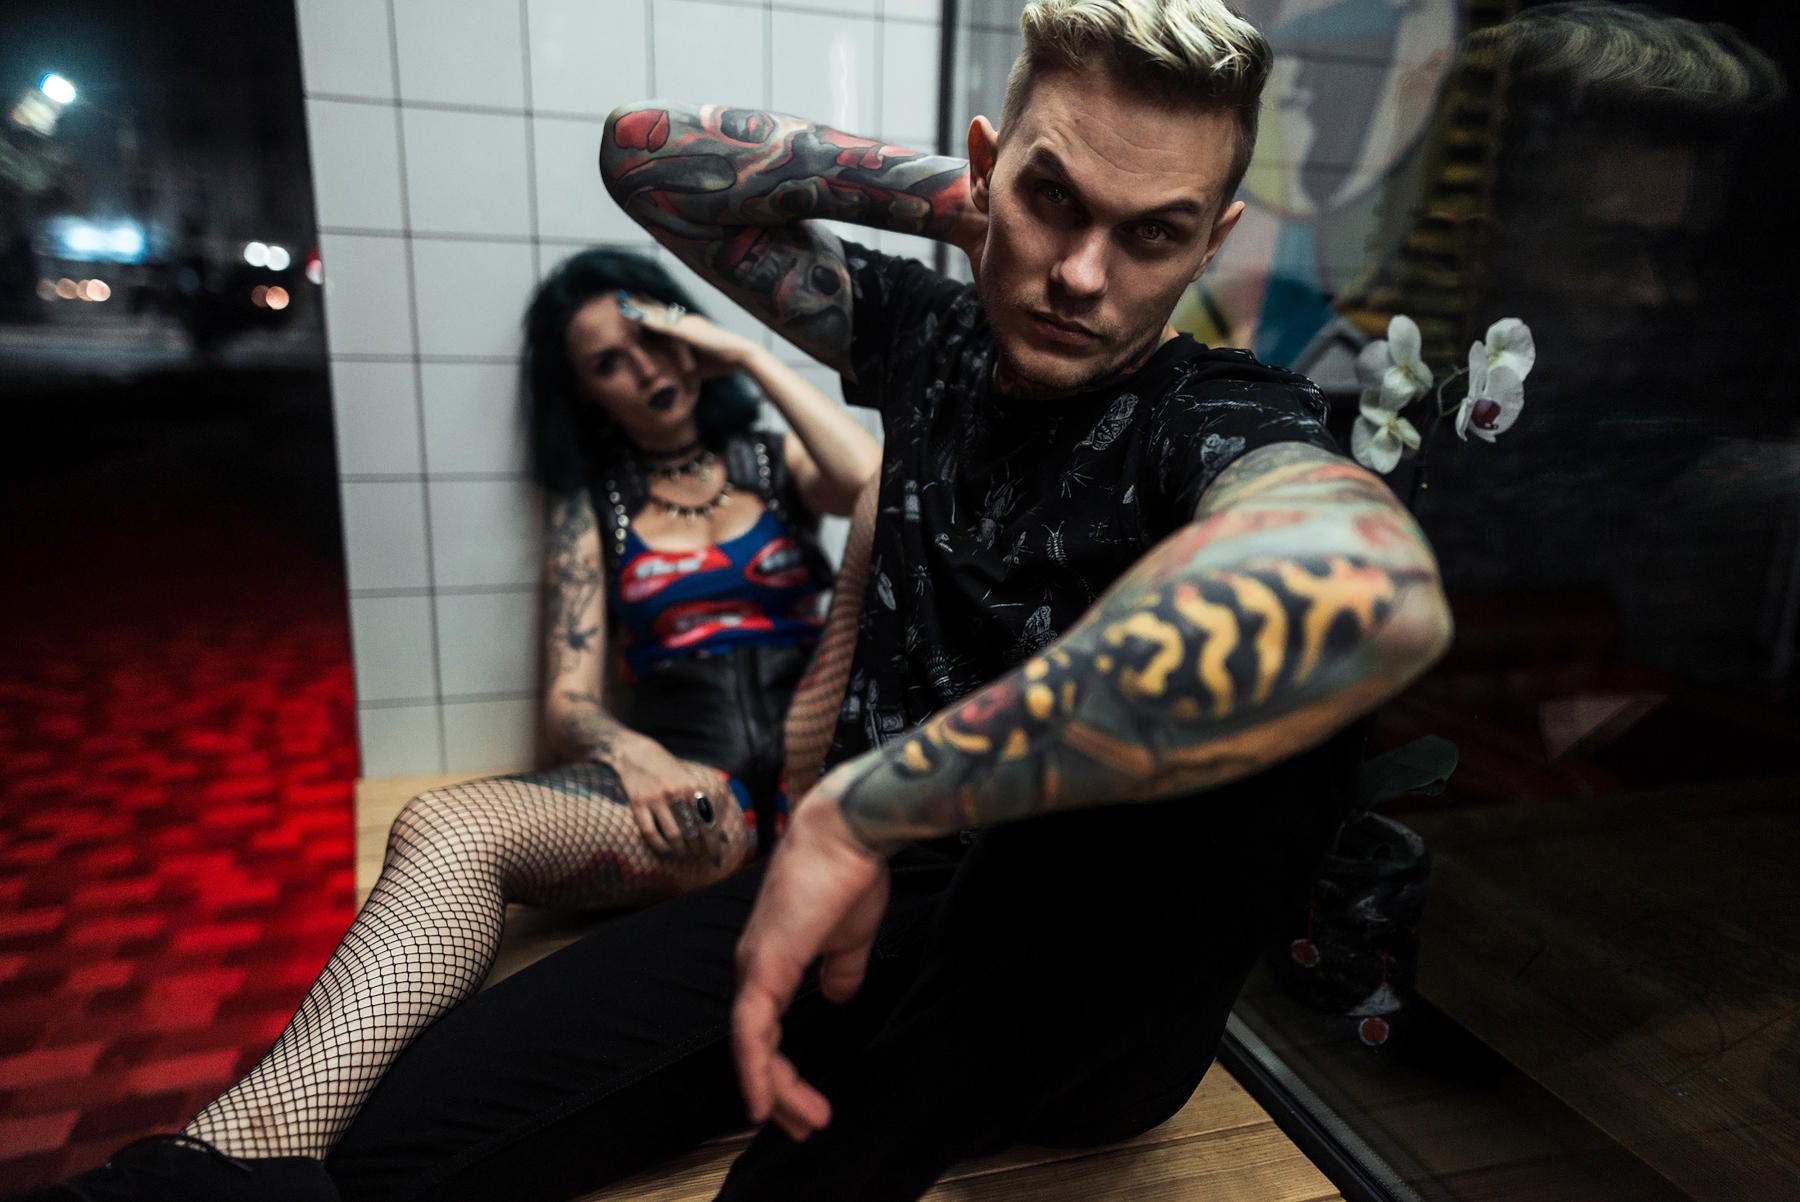 Man with full sleeve color tattoos sitting in front of girl who looks passed out sitting on the floor